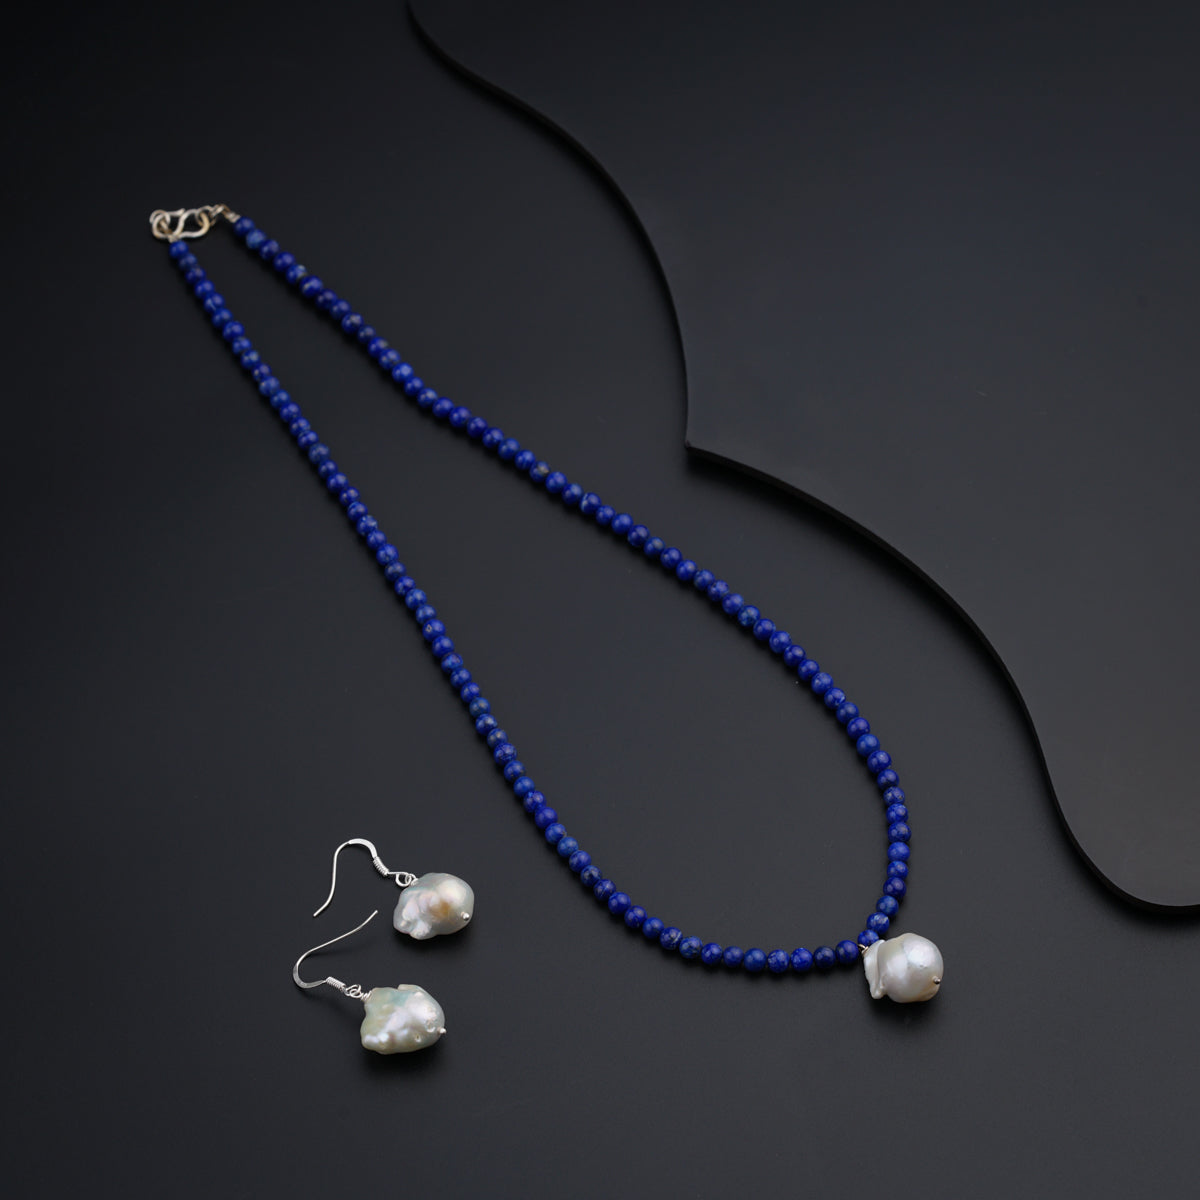 a necklace and earring set with pearls on a black background